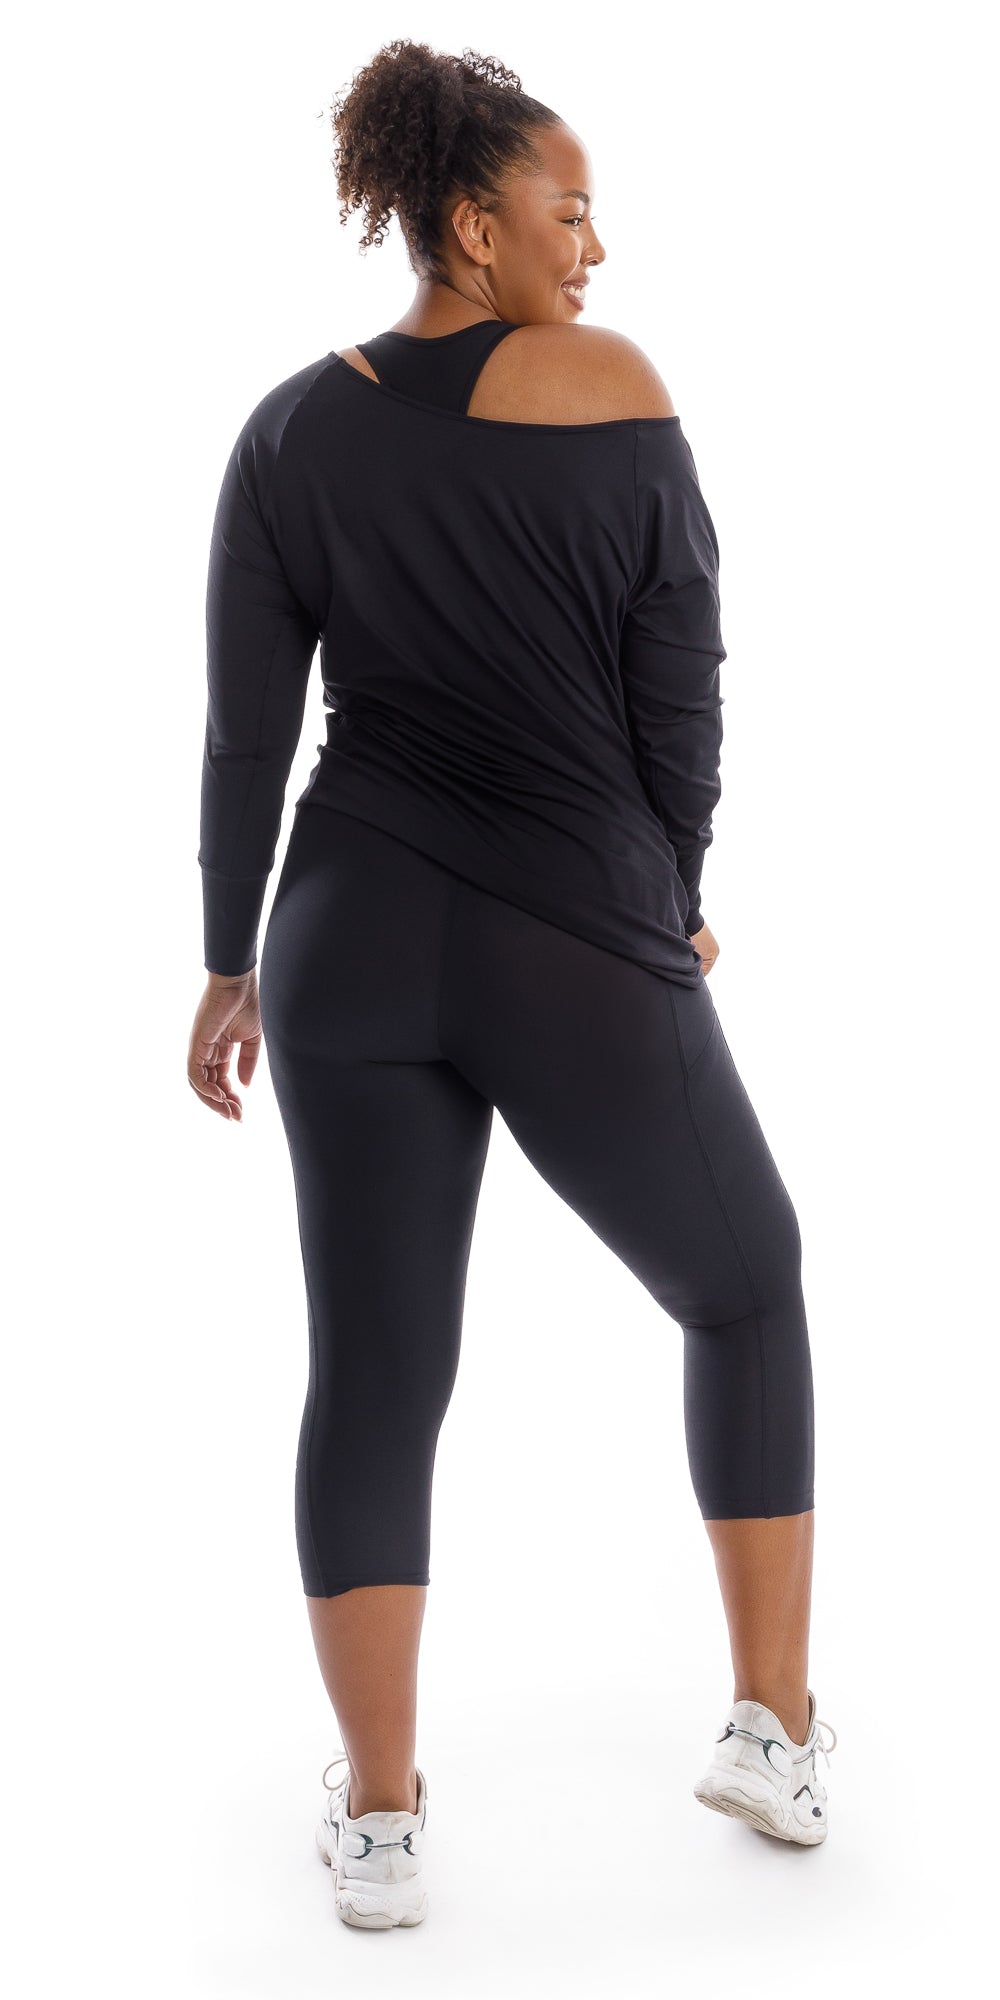 Full body rear view of girl wearing black Midnight Off The Shoulder Long Sleeve Tee and matching bottoms looking to her right and putting one leg forward